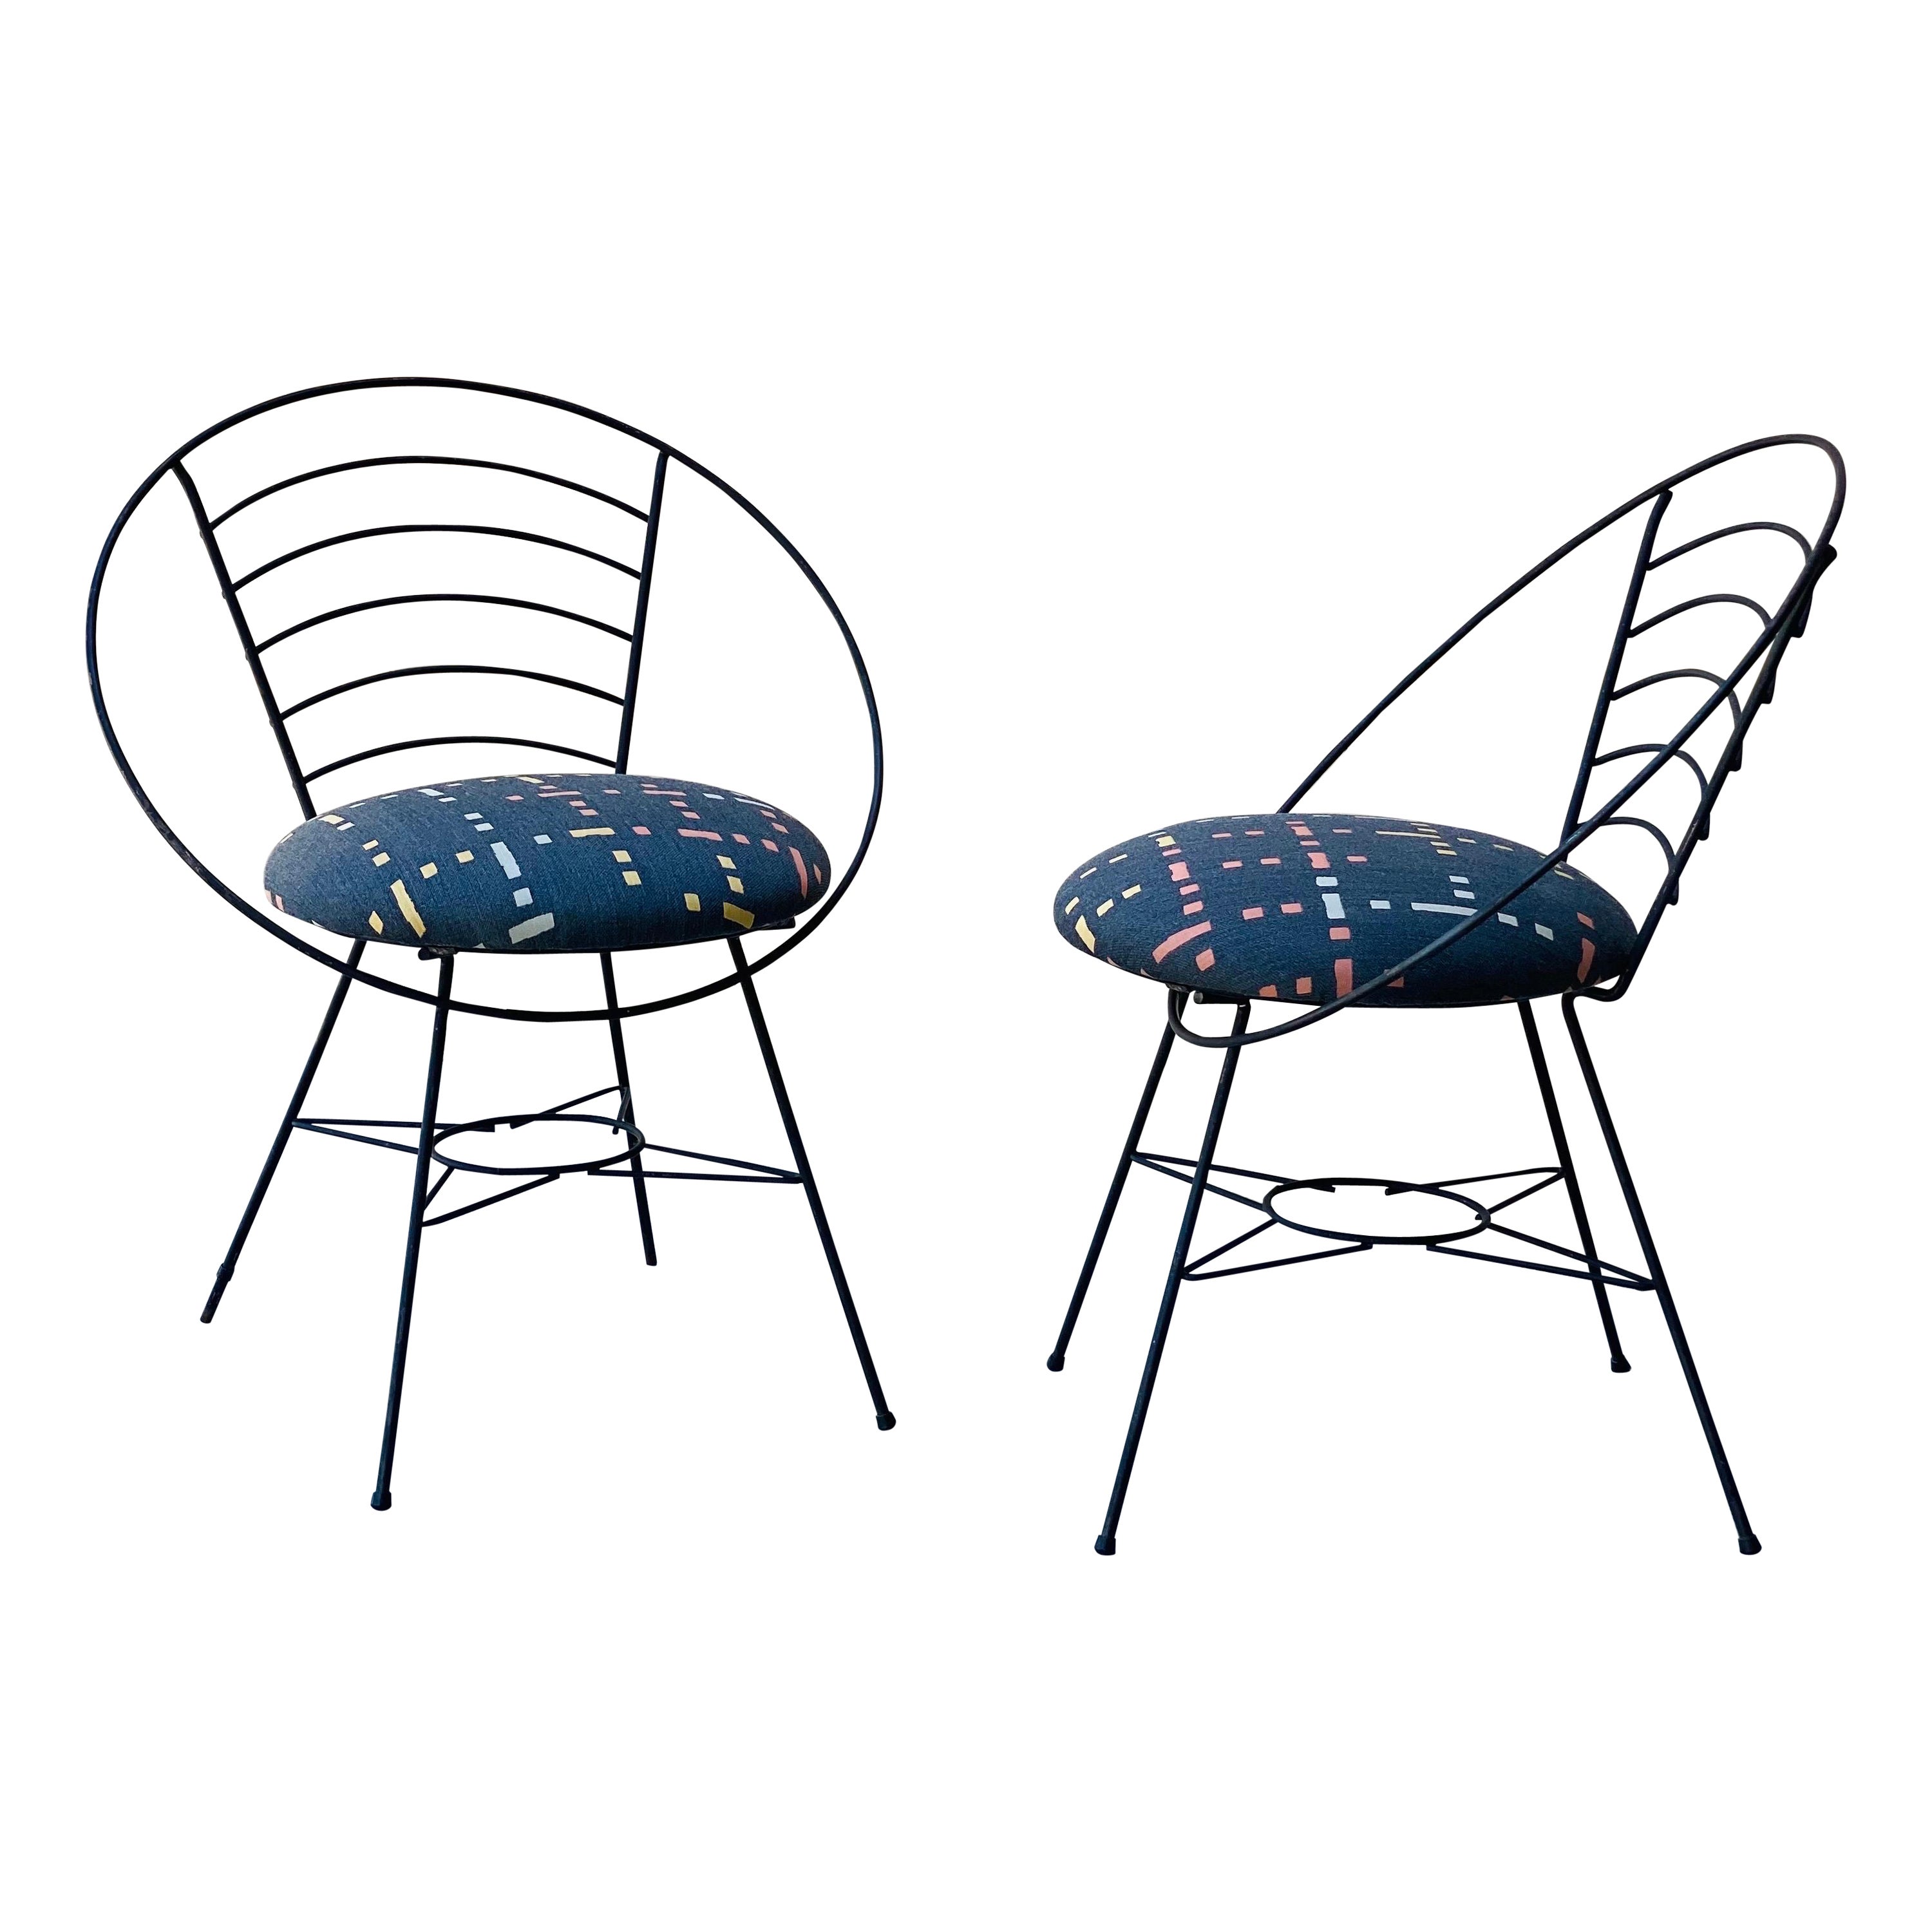 1970s Wrought Black Iron Atomic Hoop Chairs, a Pair For Sale